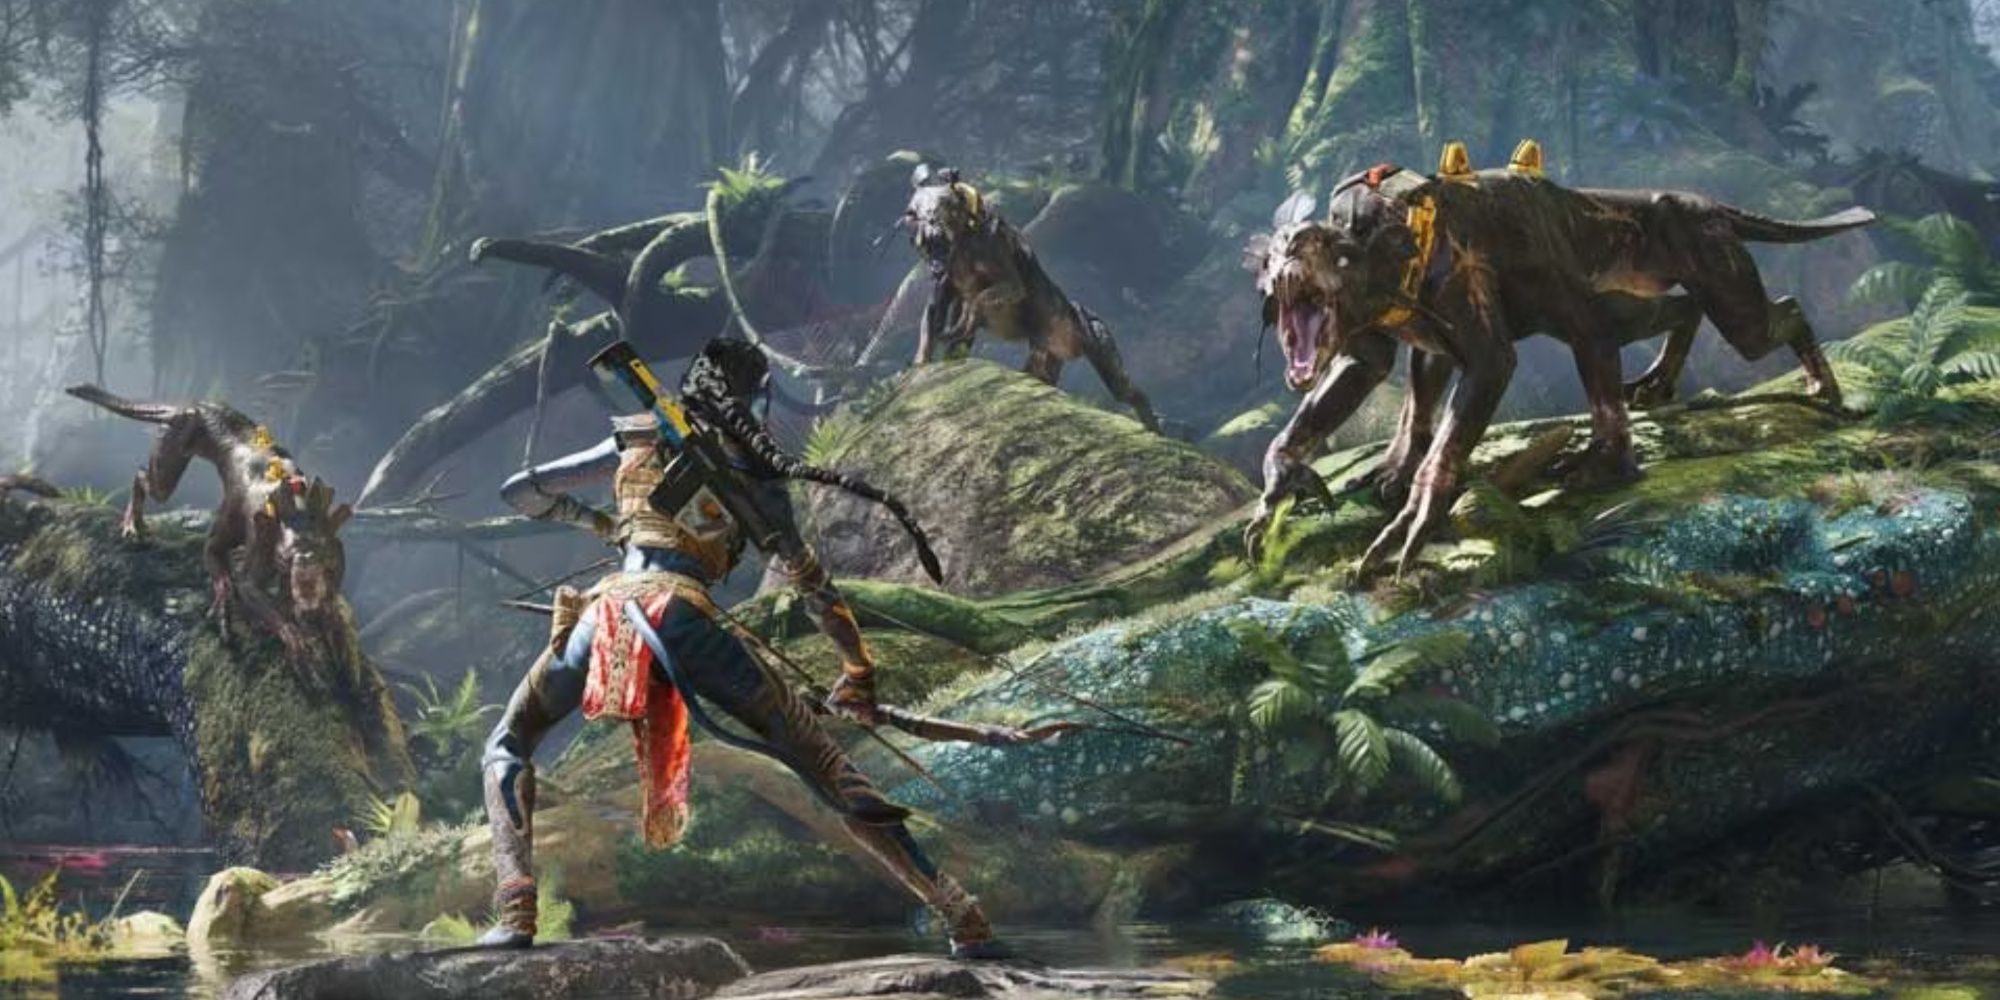 avatar: frontiers of pandora's hero facing animals with a bow and arrow